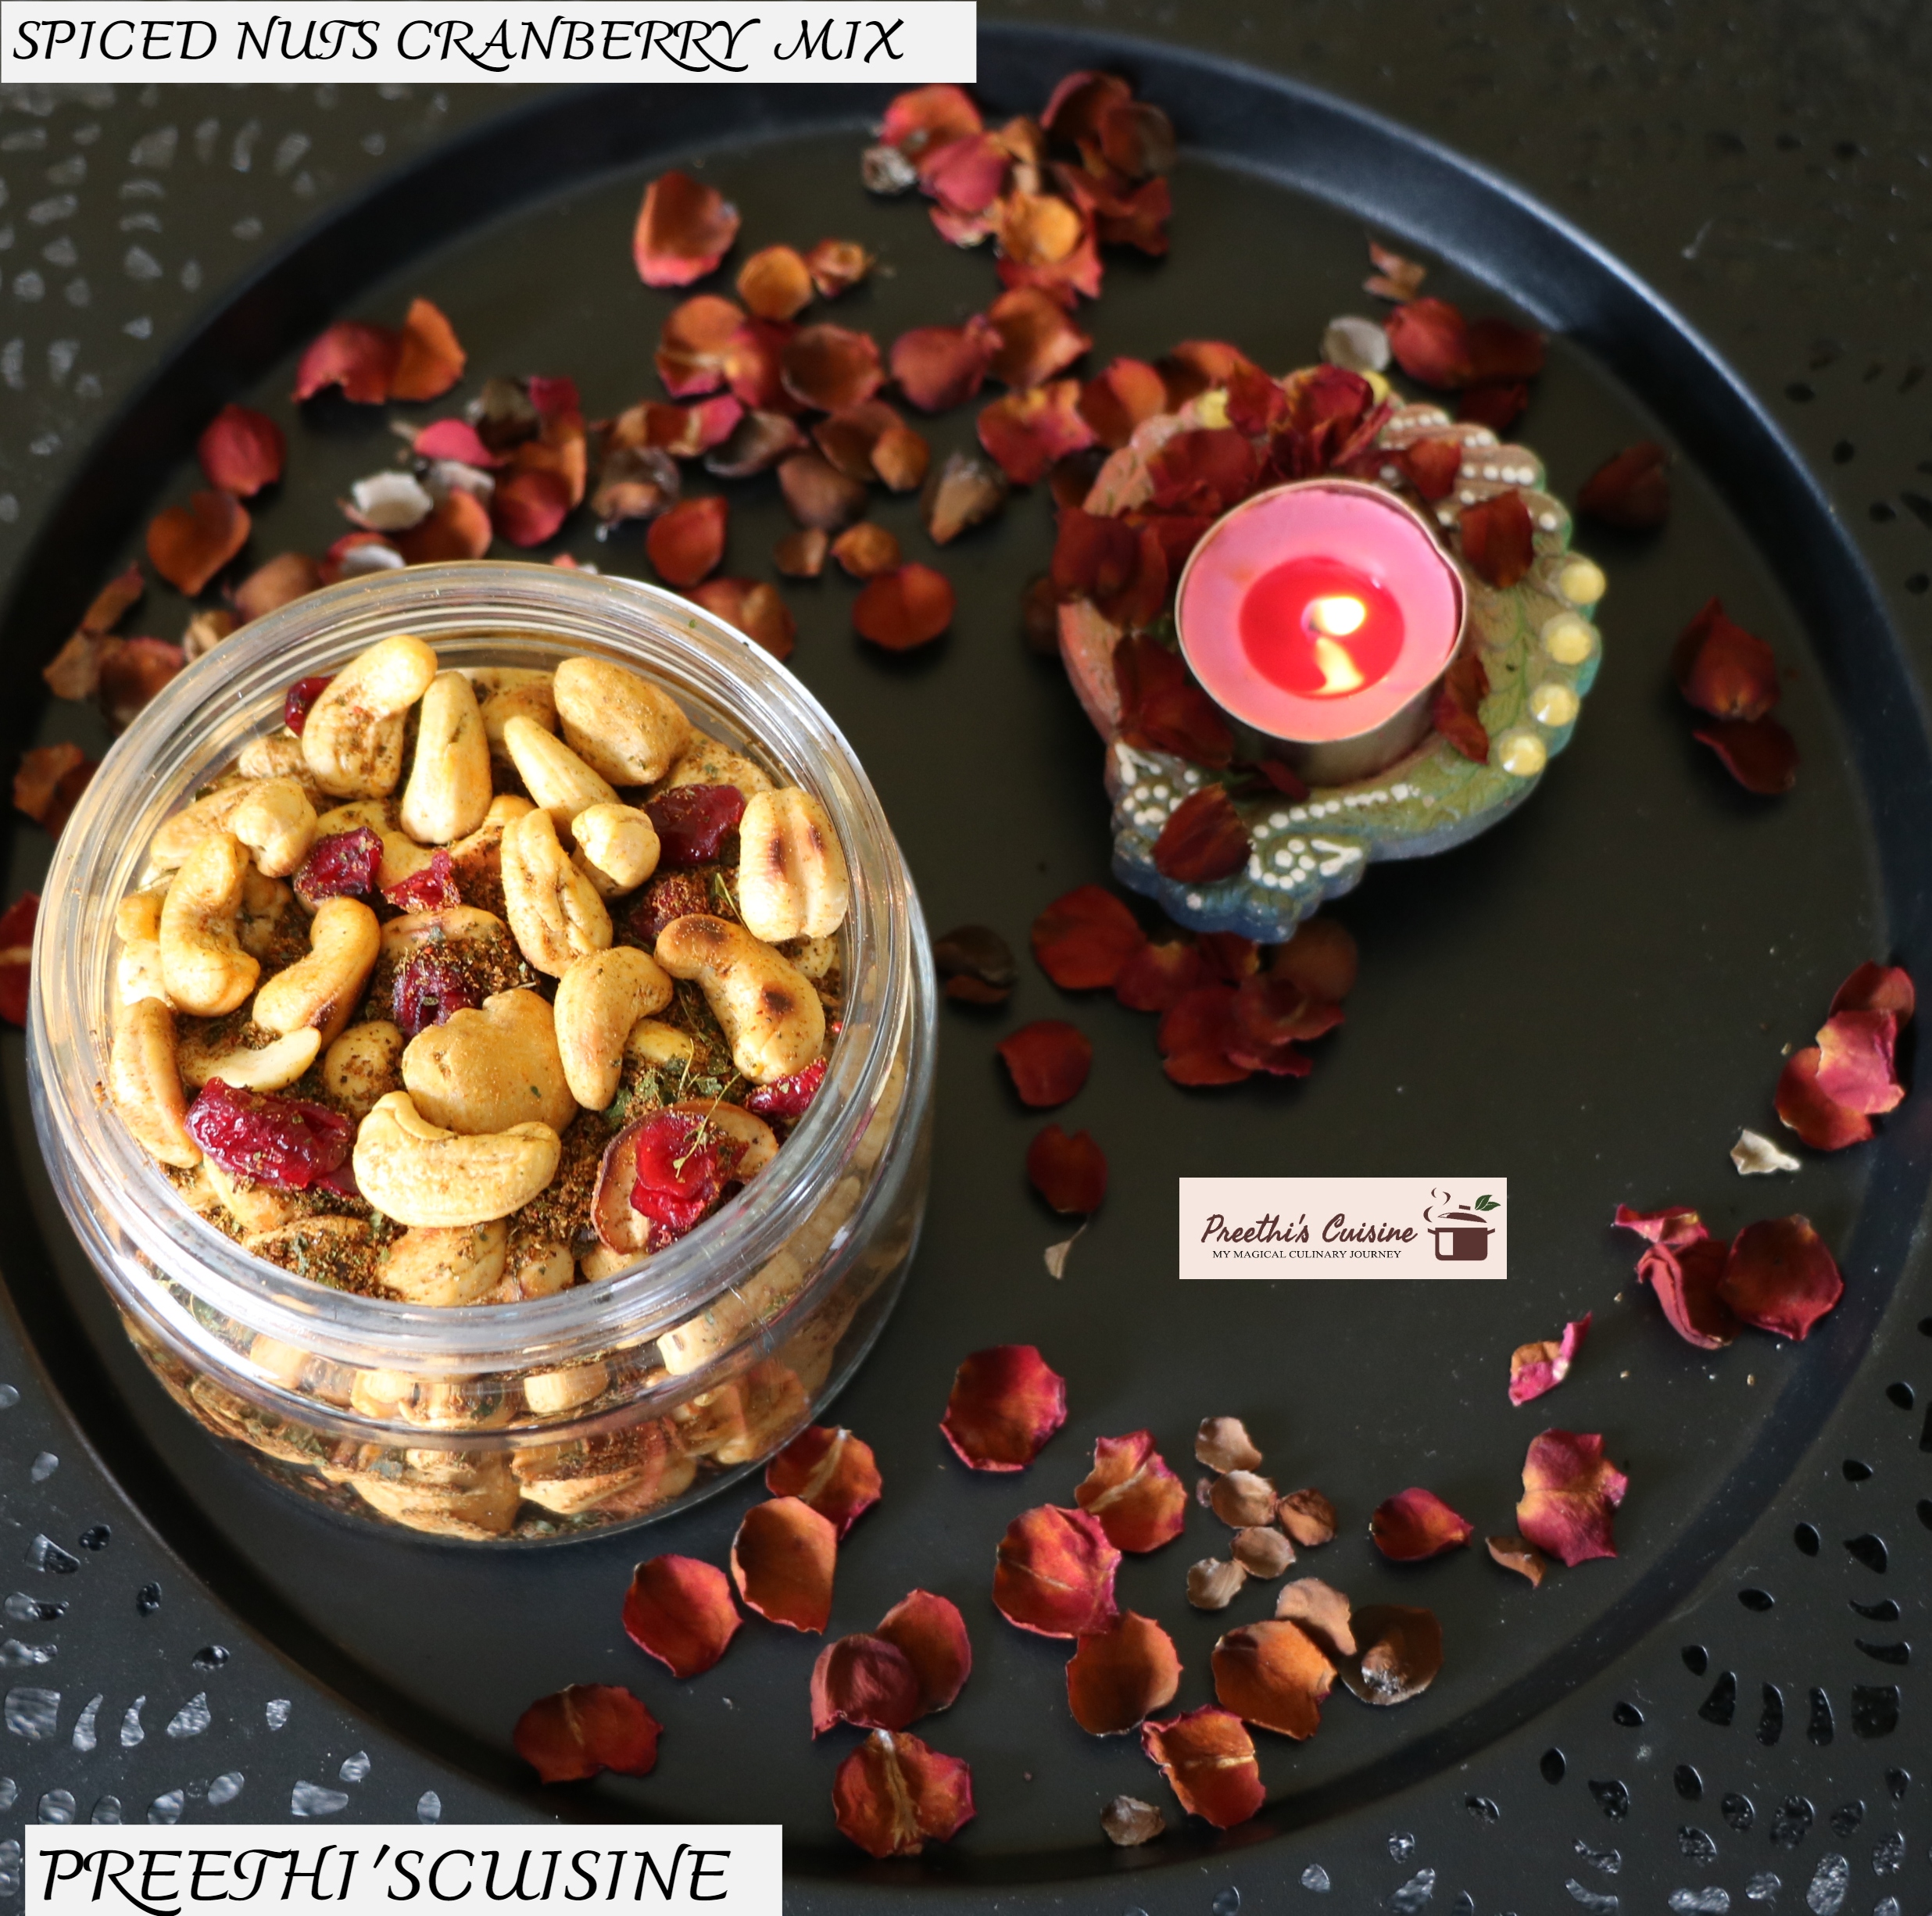 SPICED NUTS CRANBERRY MIX